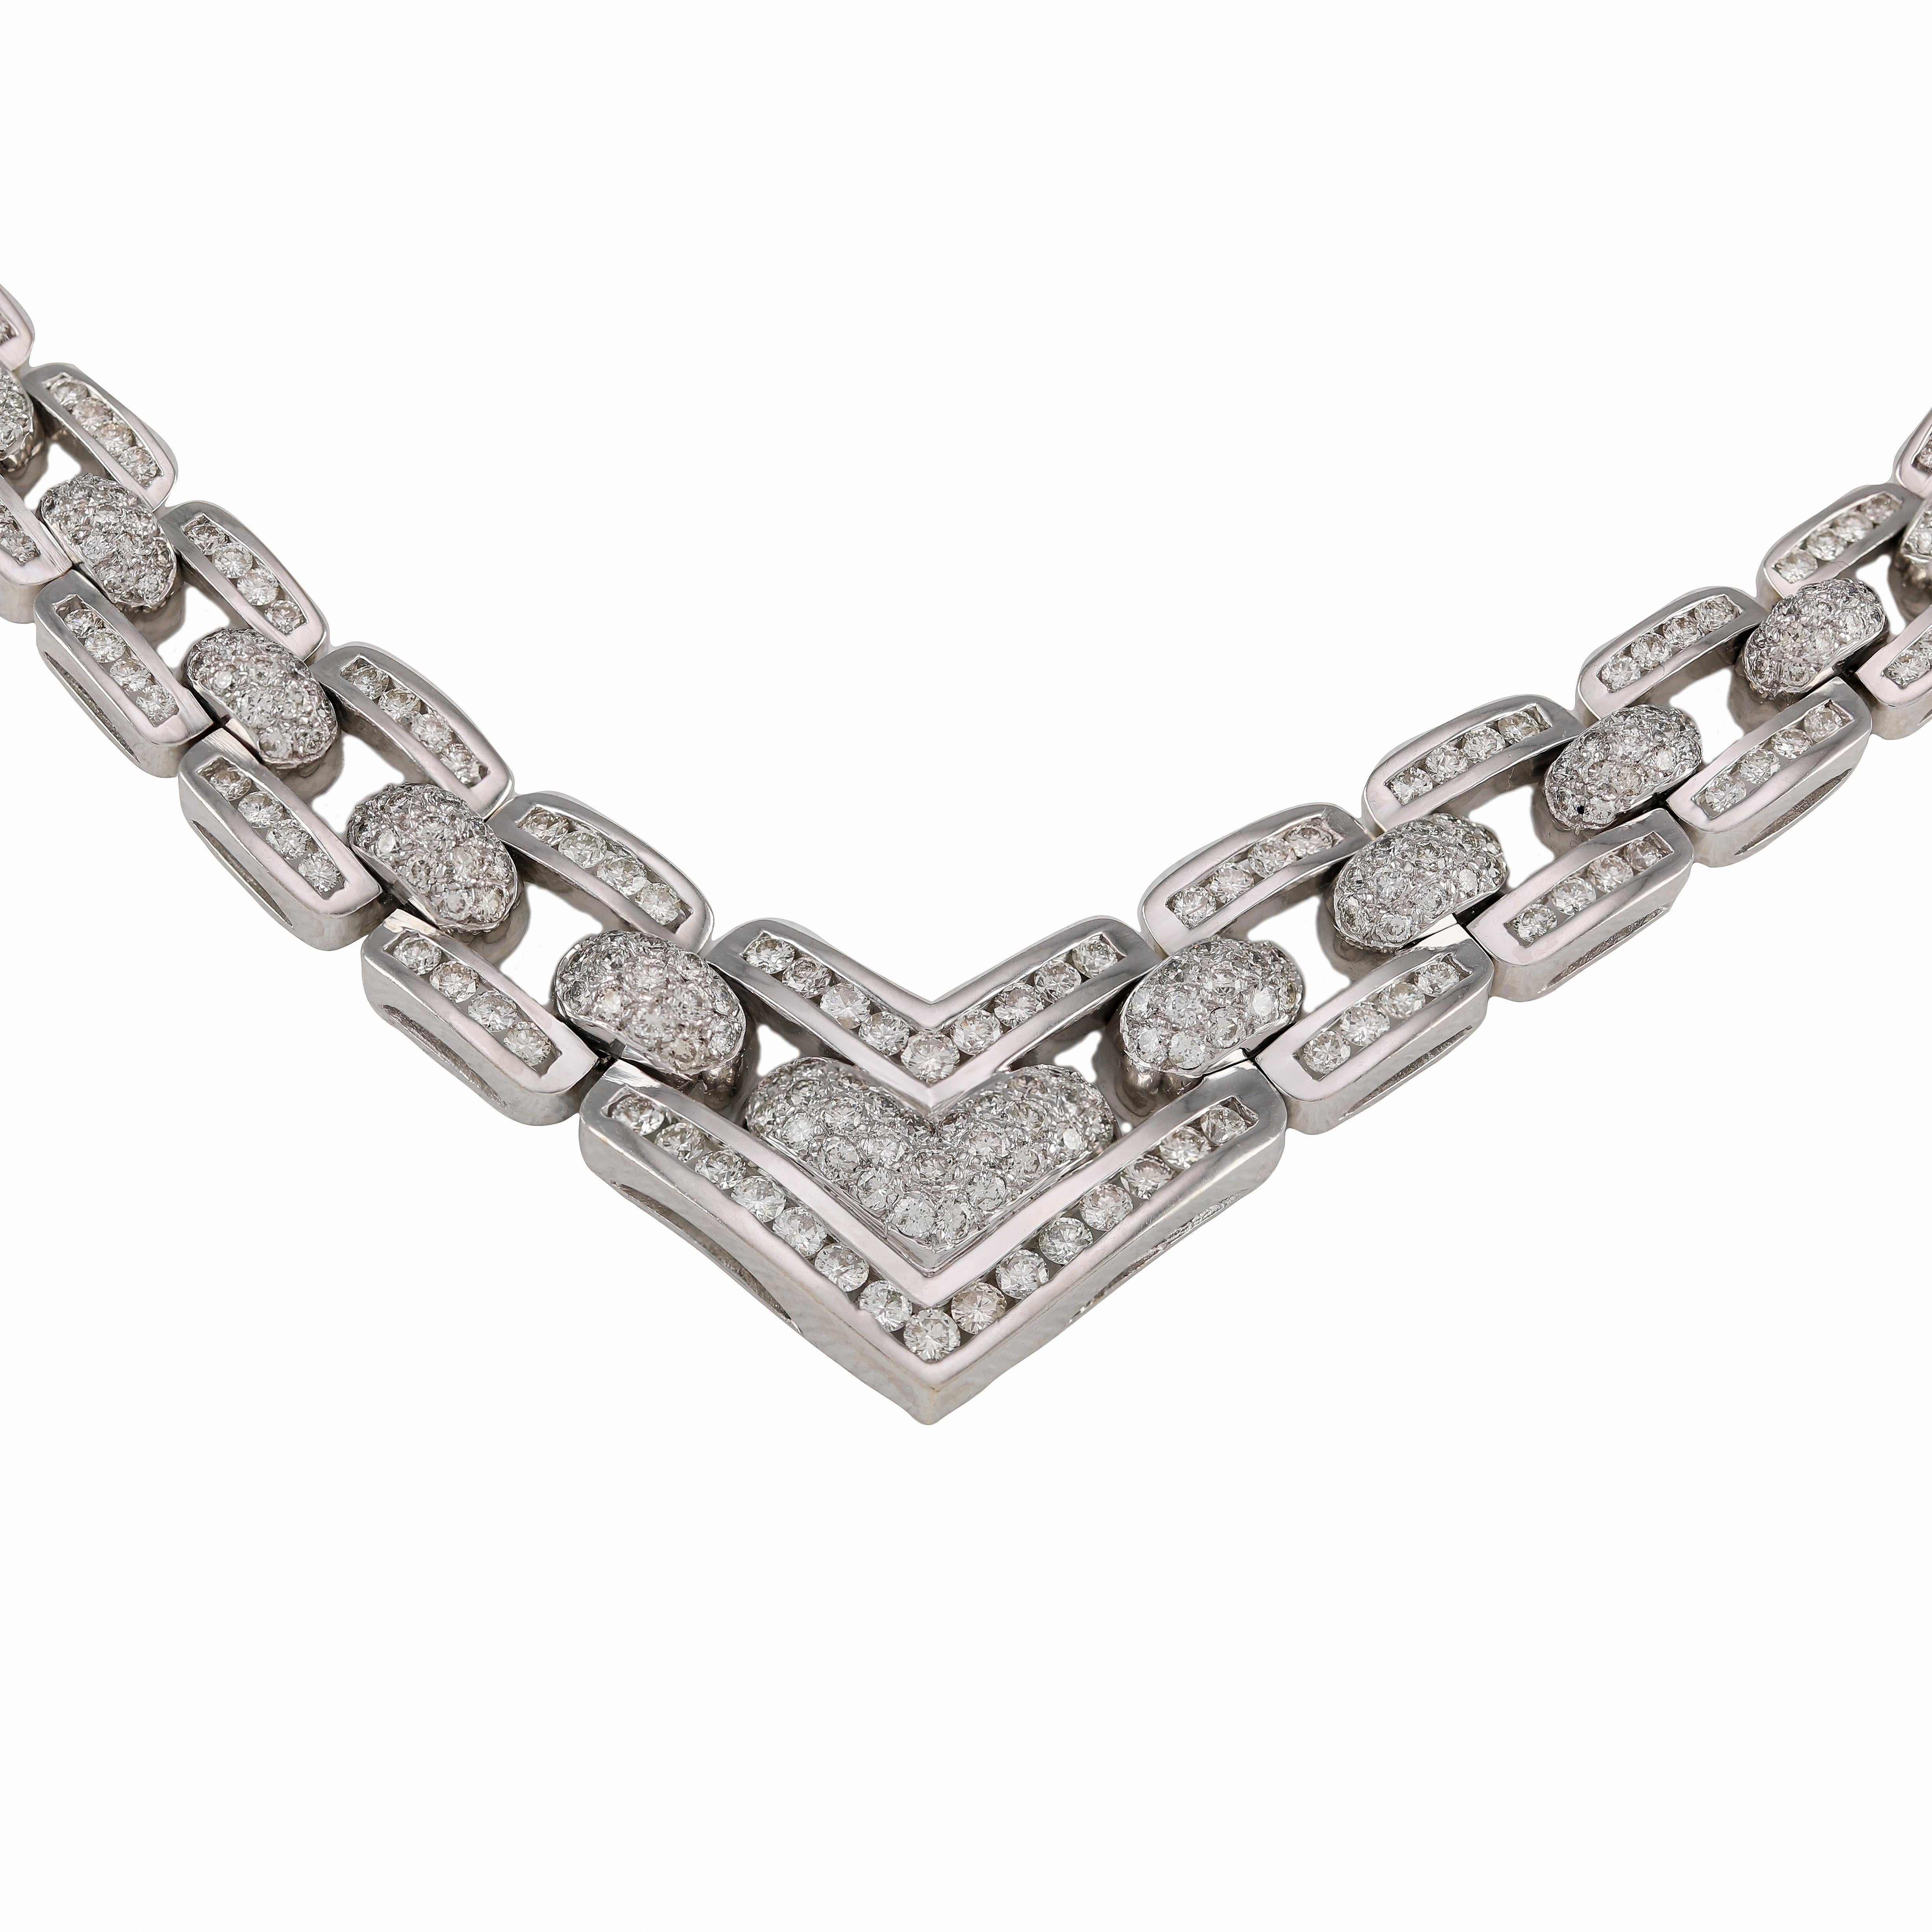 Ladies Heavy Link 8.00 Carat Pavé and Channel Set Diamond Necklace
Spectacular ultra high-end and very heavy diamond necklace fit for the red carpet, a queen, or the fabulous bride. This necklace is encrusted with 8.00 carats of diamonds and handset